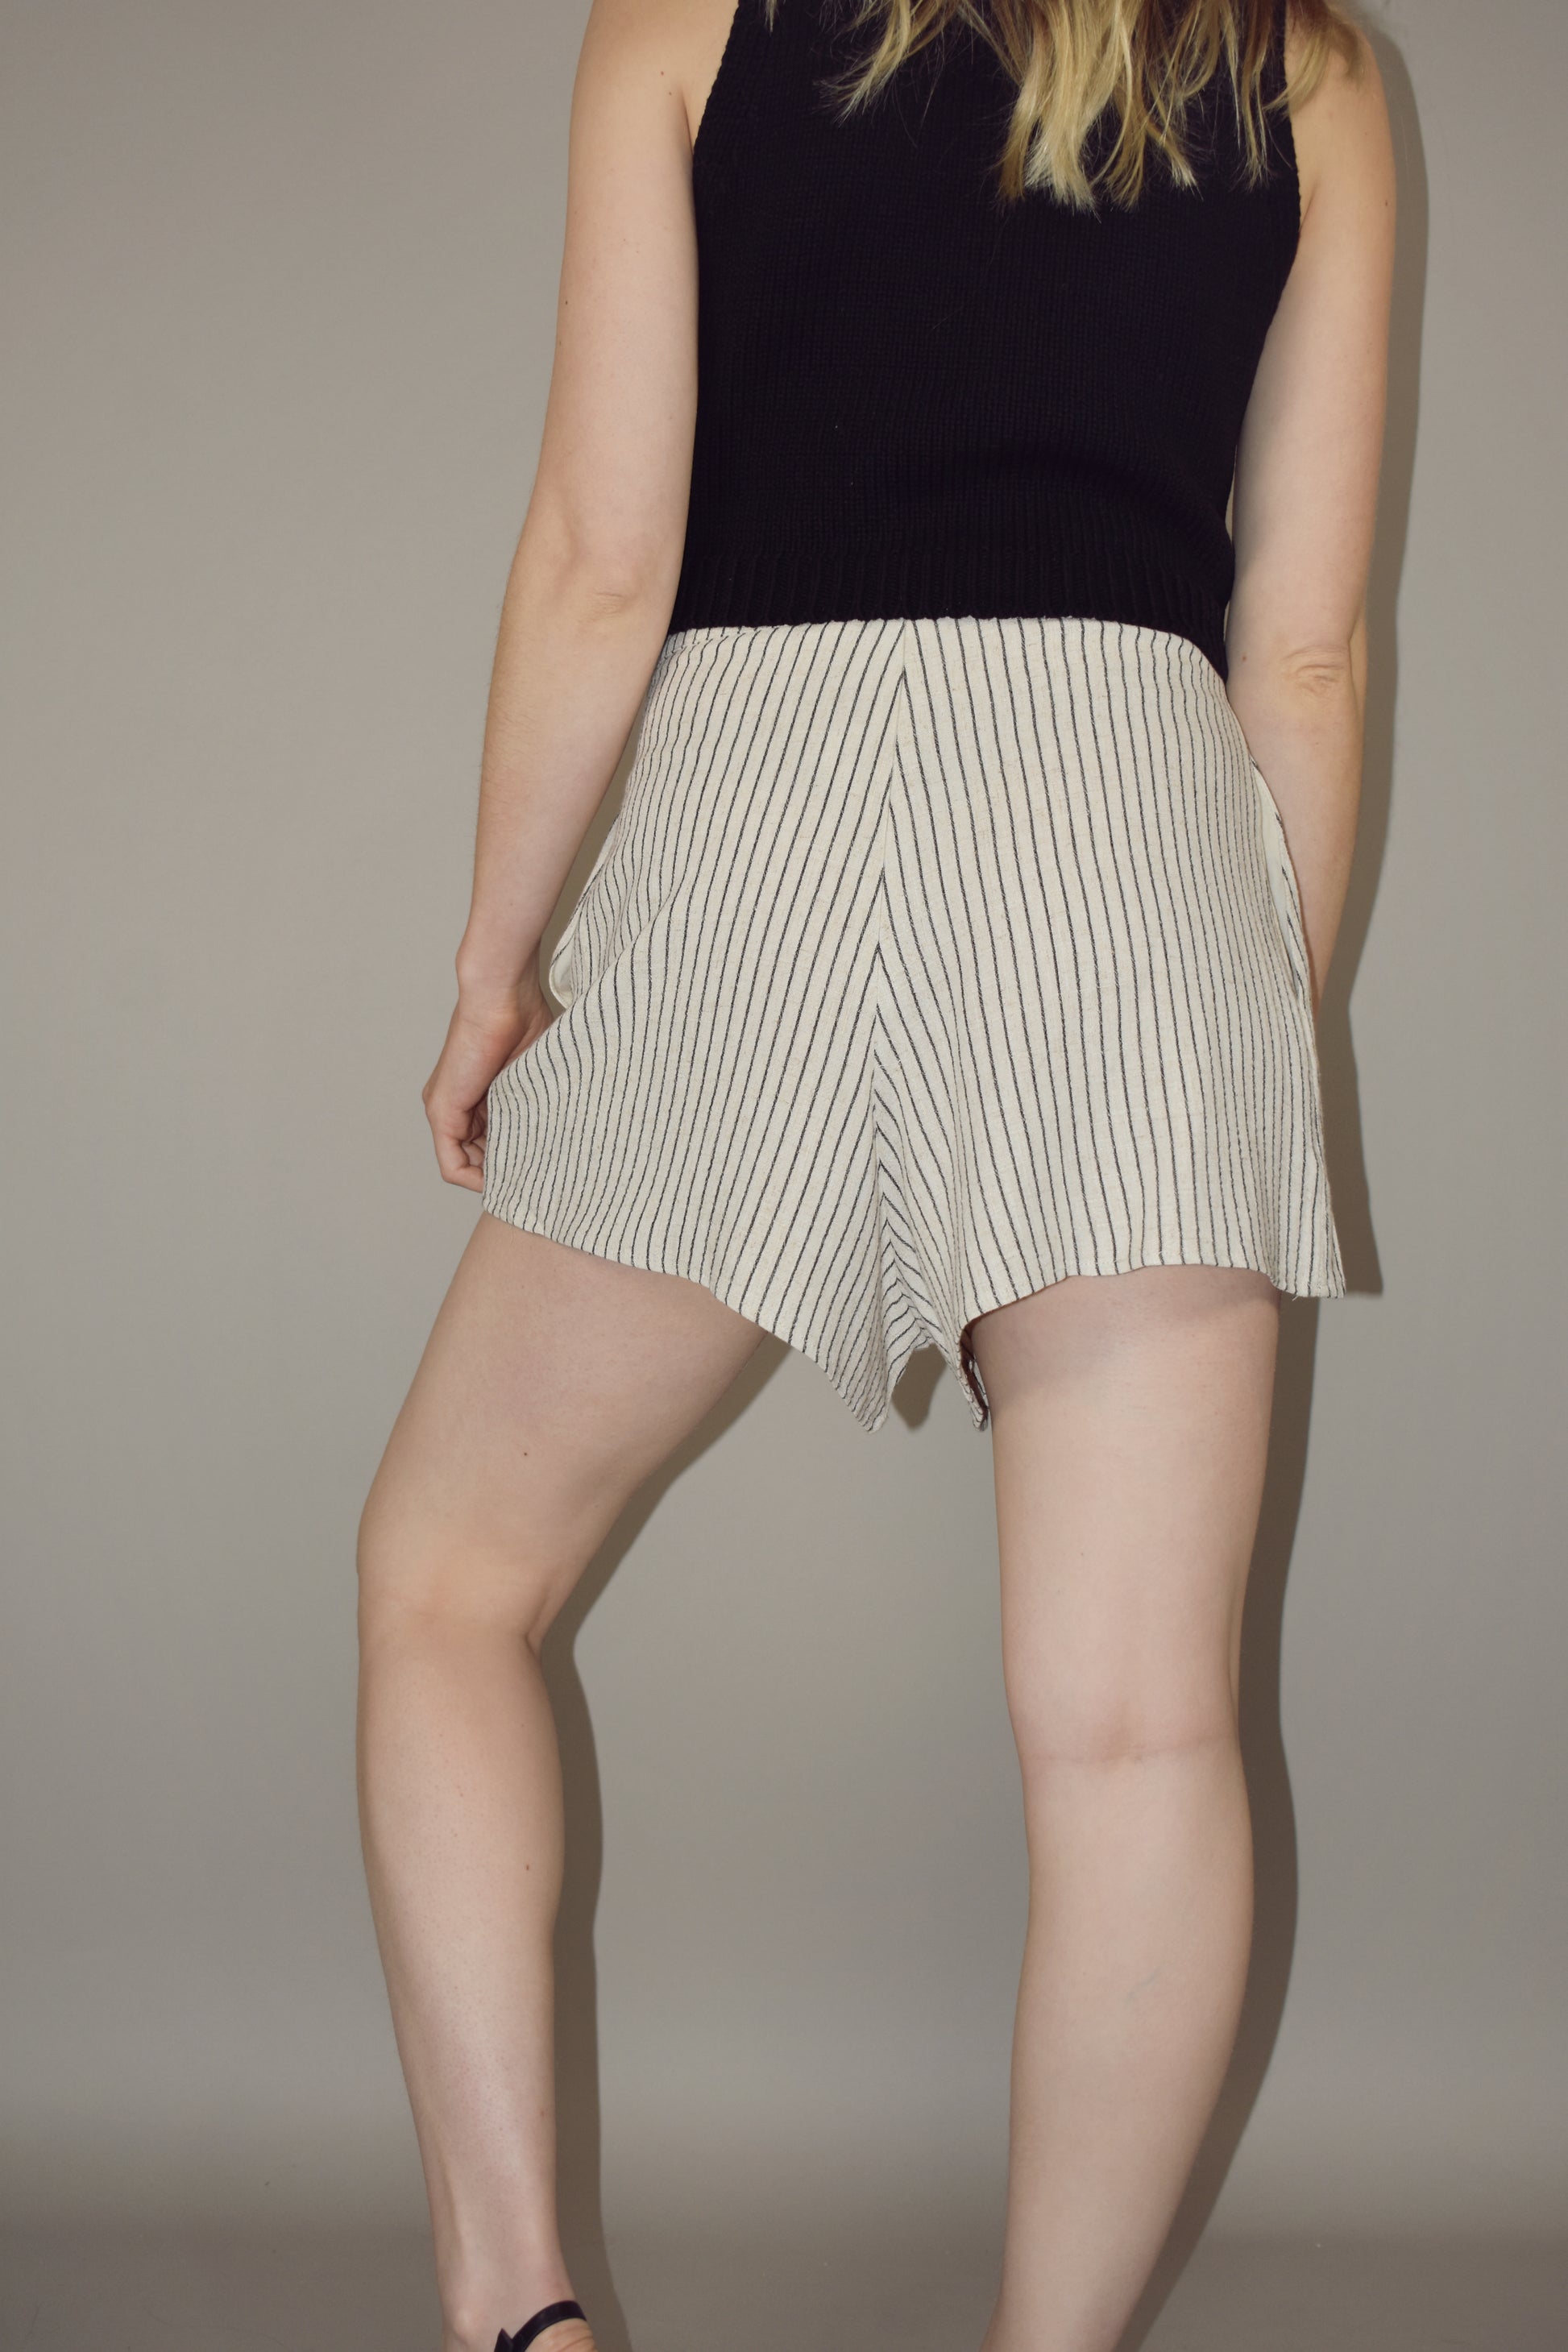 linen shorts with side pockets and zip enclosure in back. cream with black vertical pin stripes. mid thigh length.